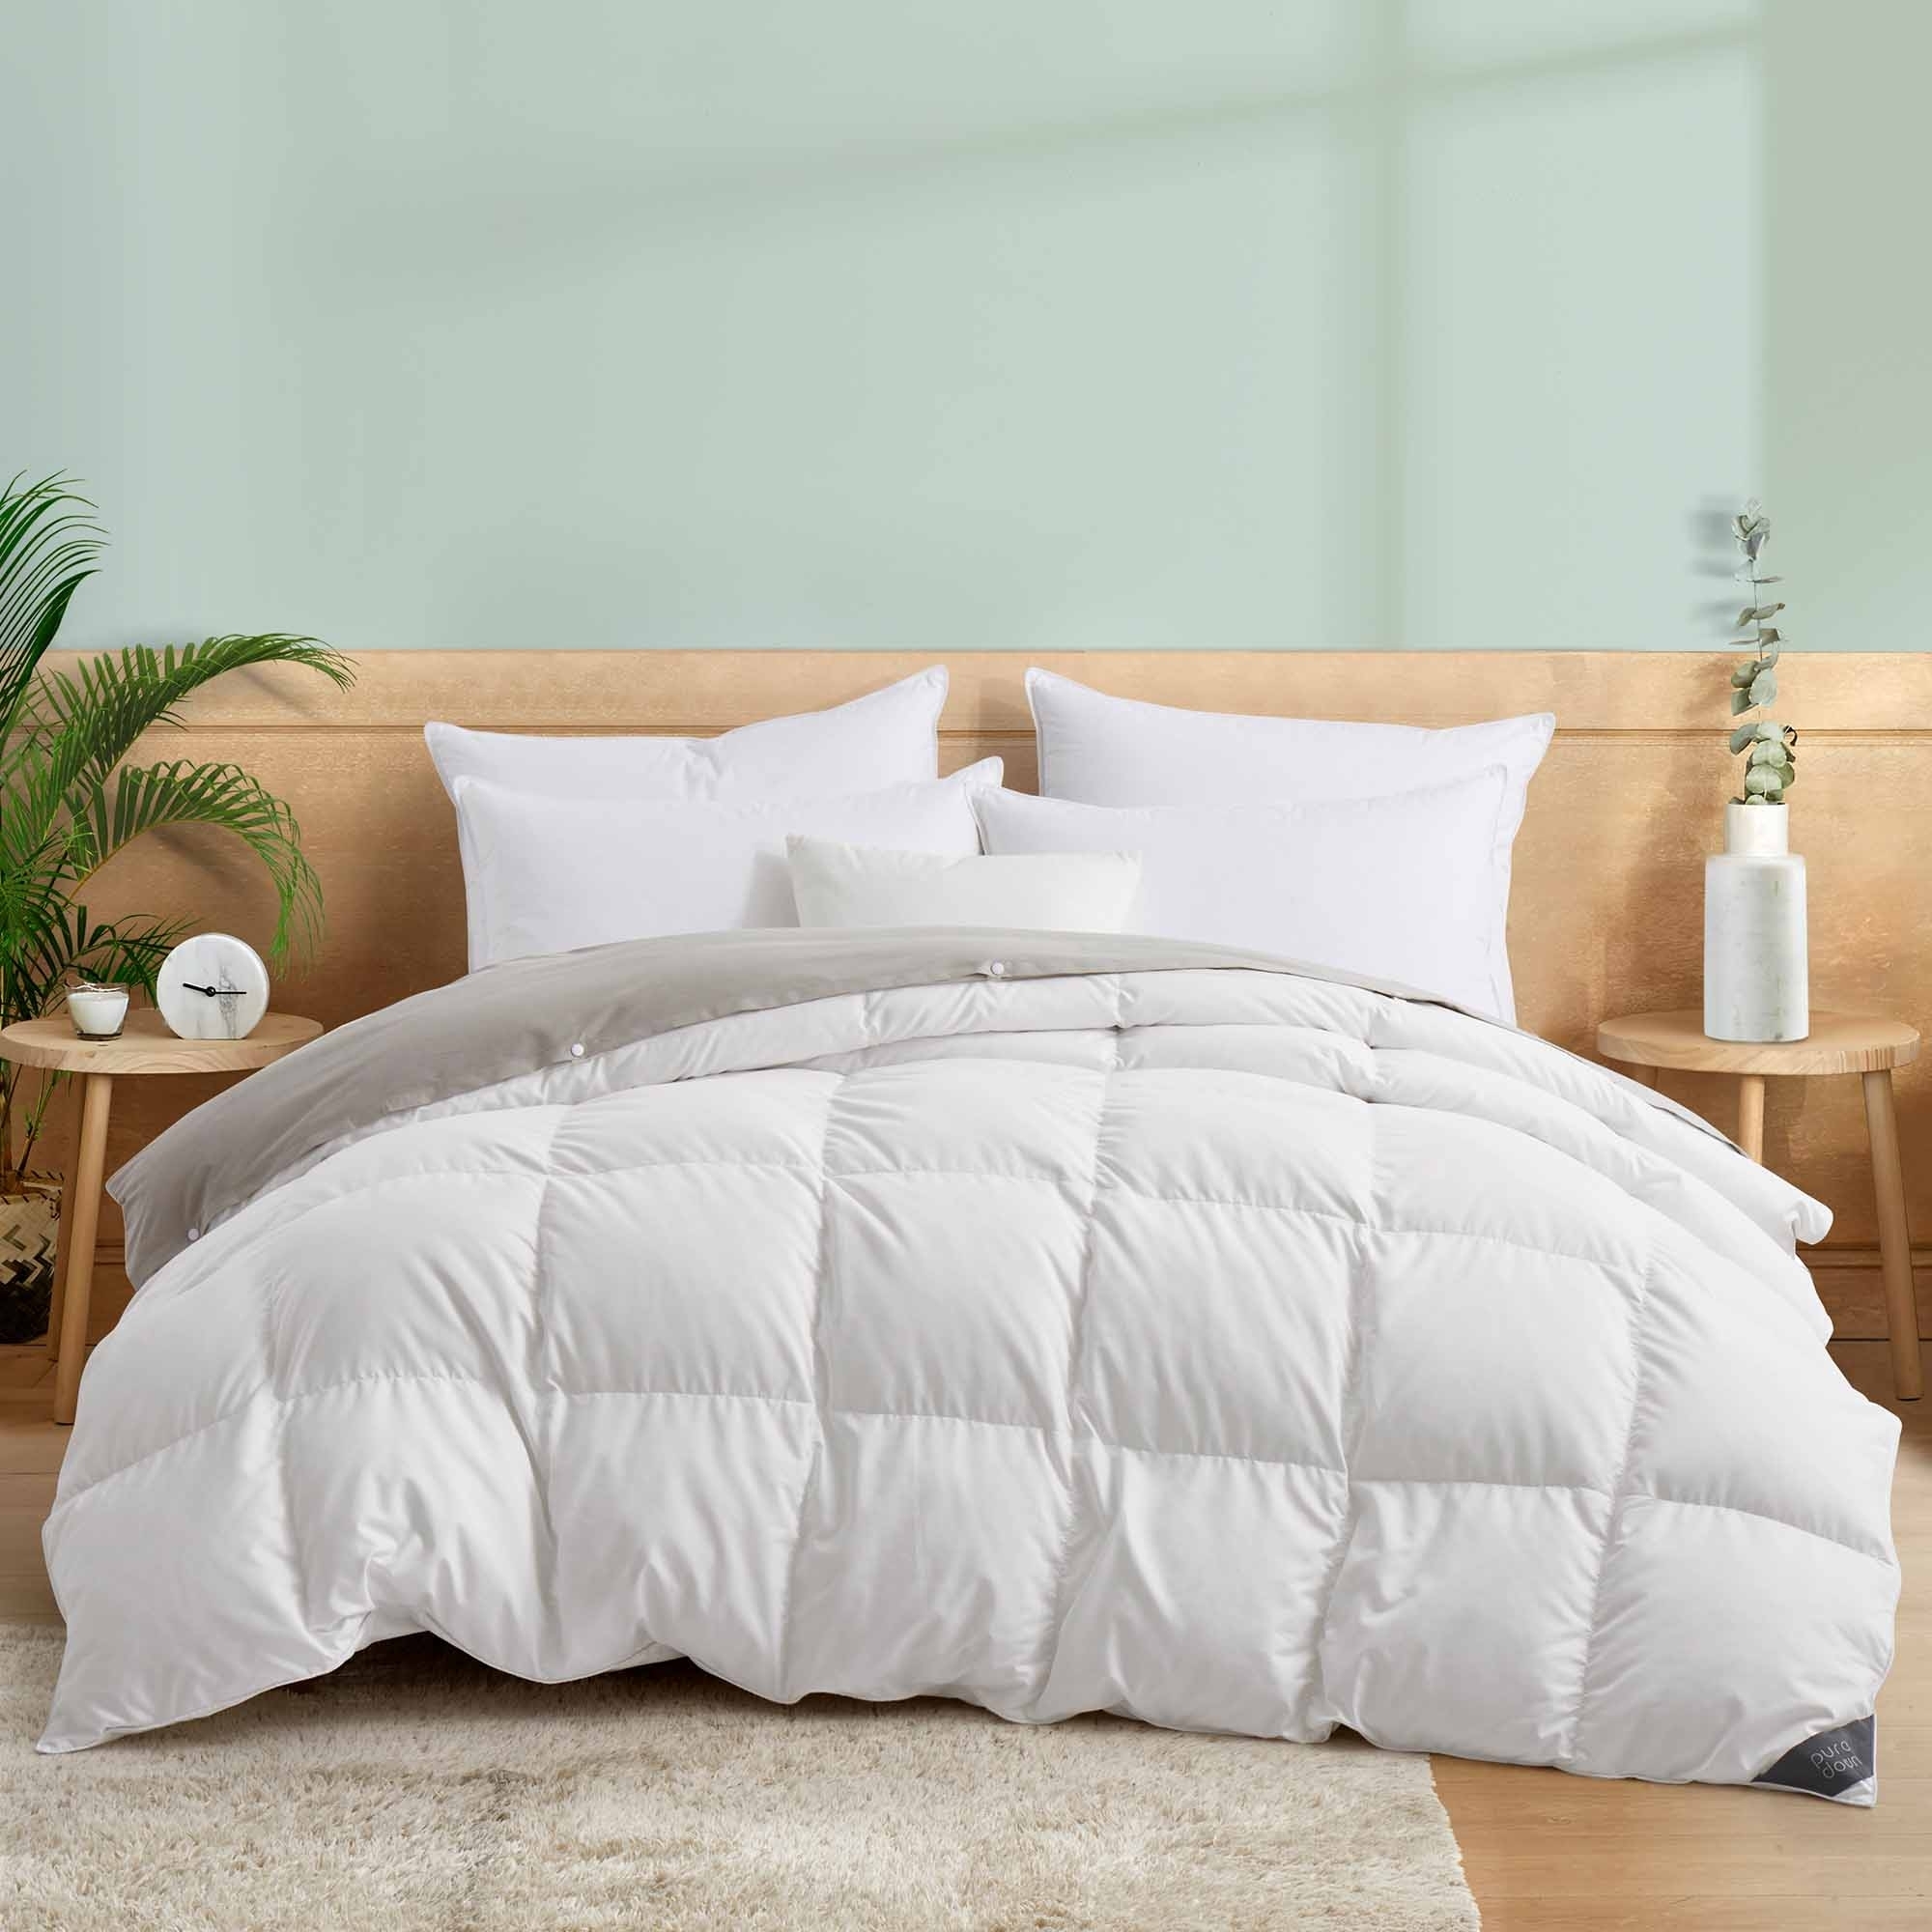 All Seasons Down Comforter With Removable Dustproof Cover - White And Gray, King